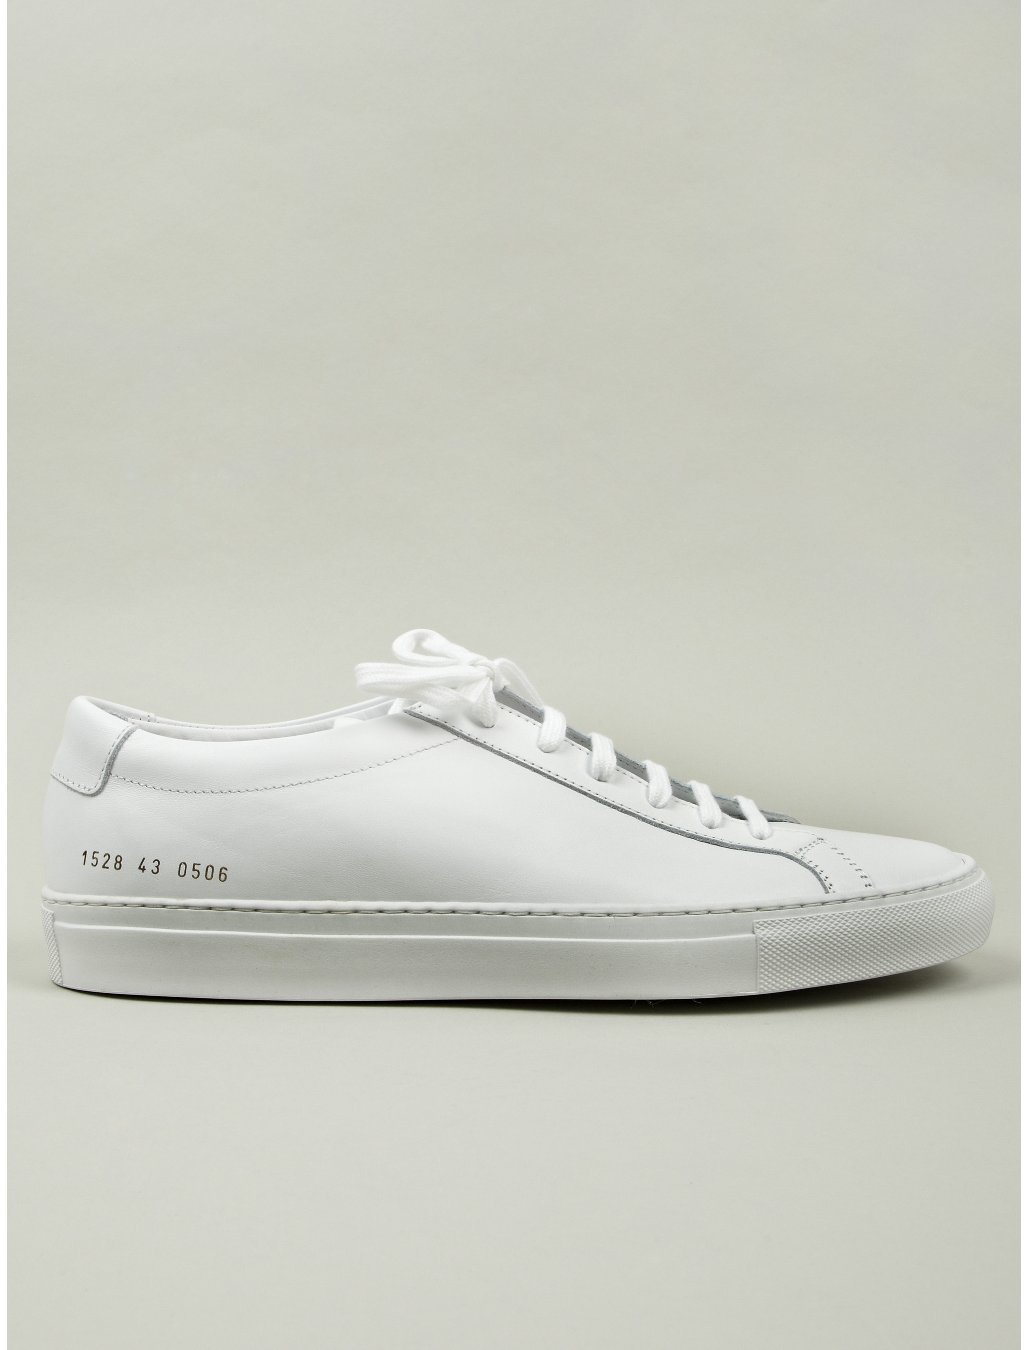 It’s On Sale: Common Projects and Margiela Sneakers